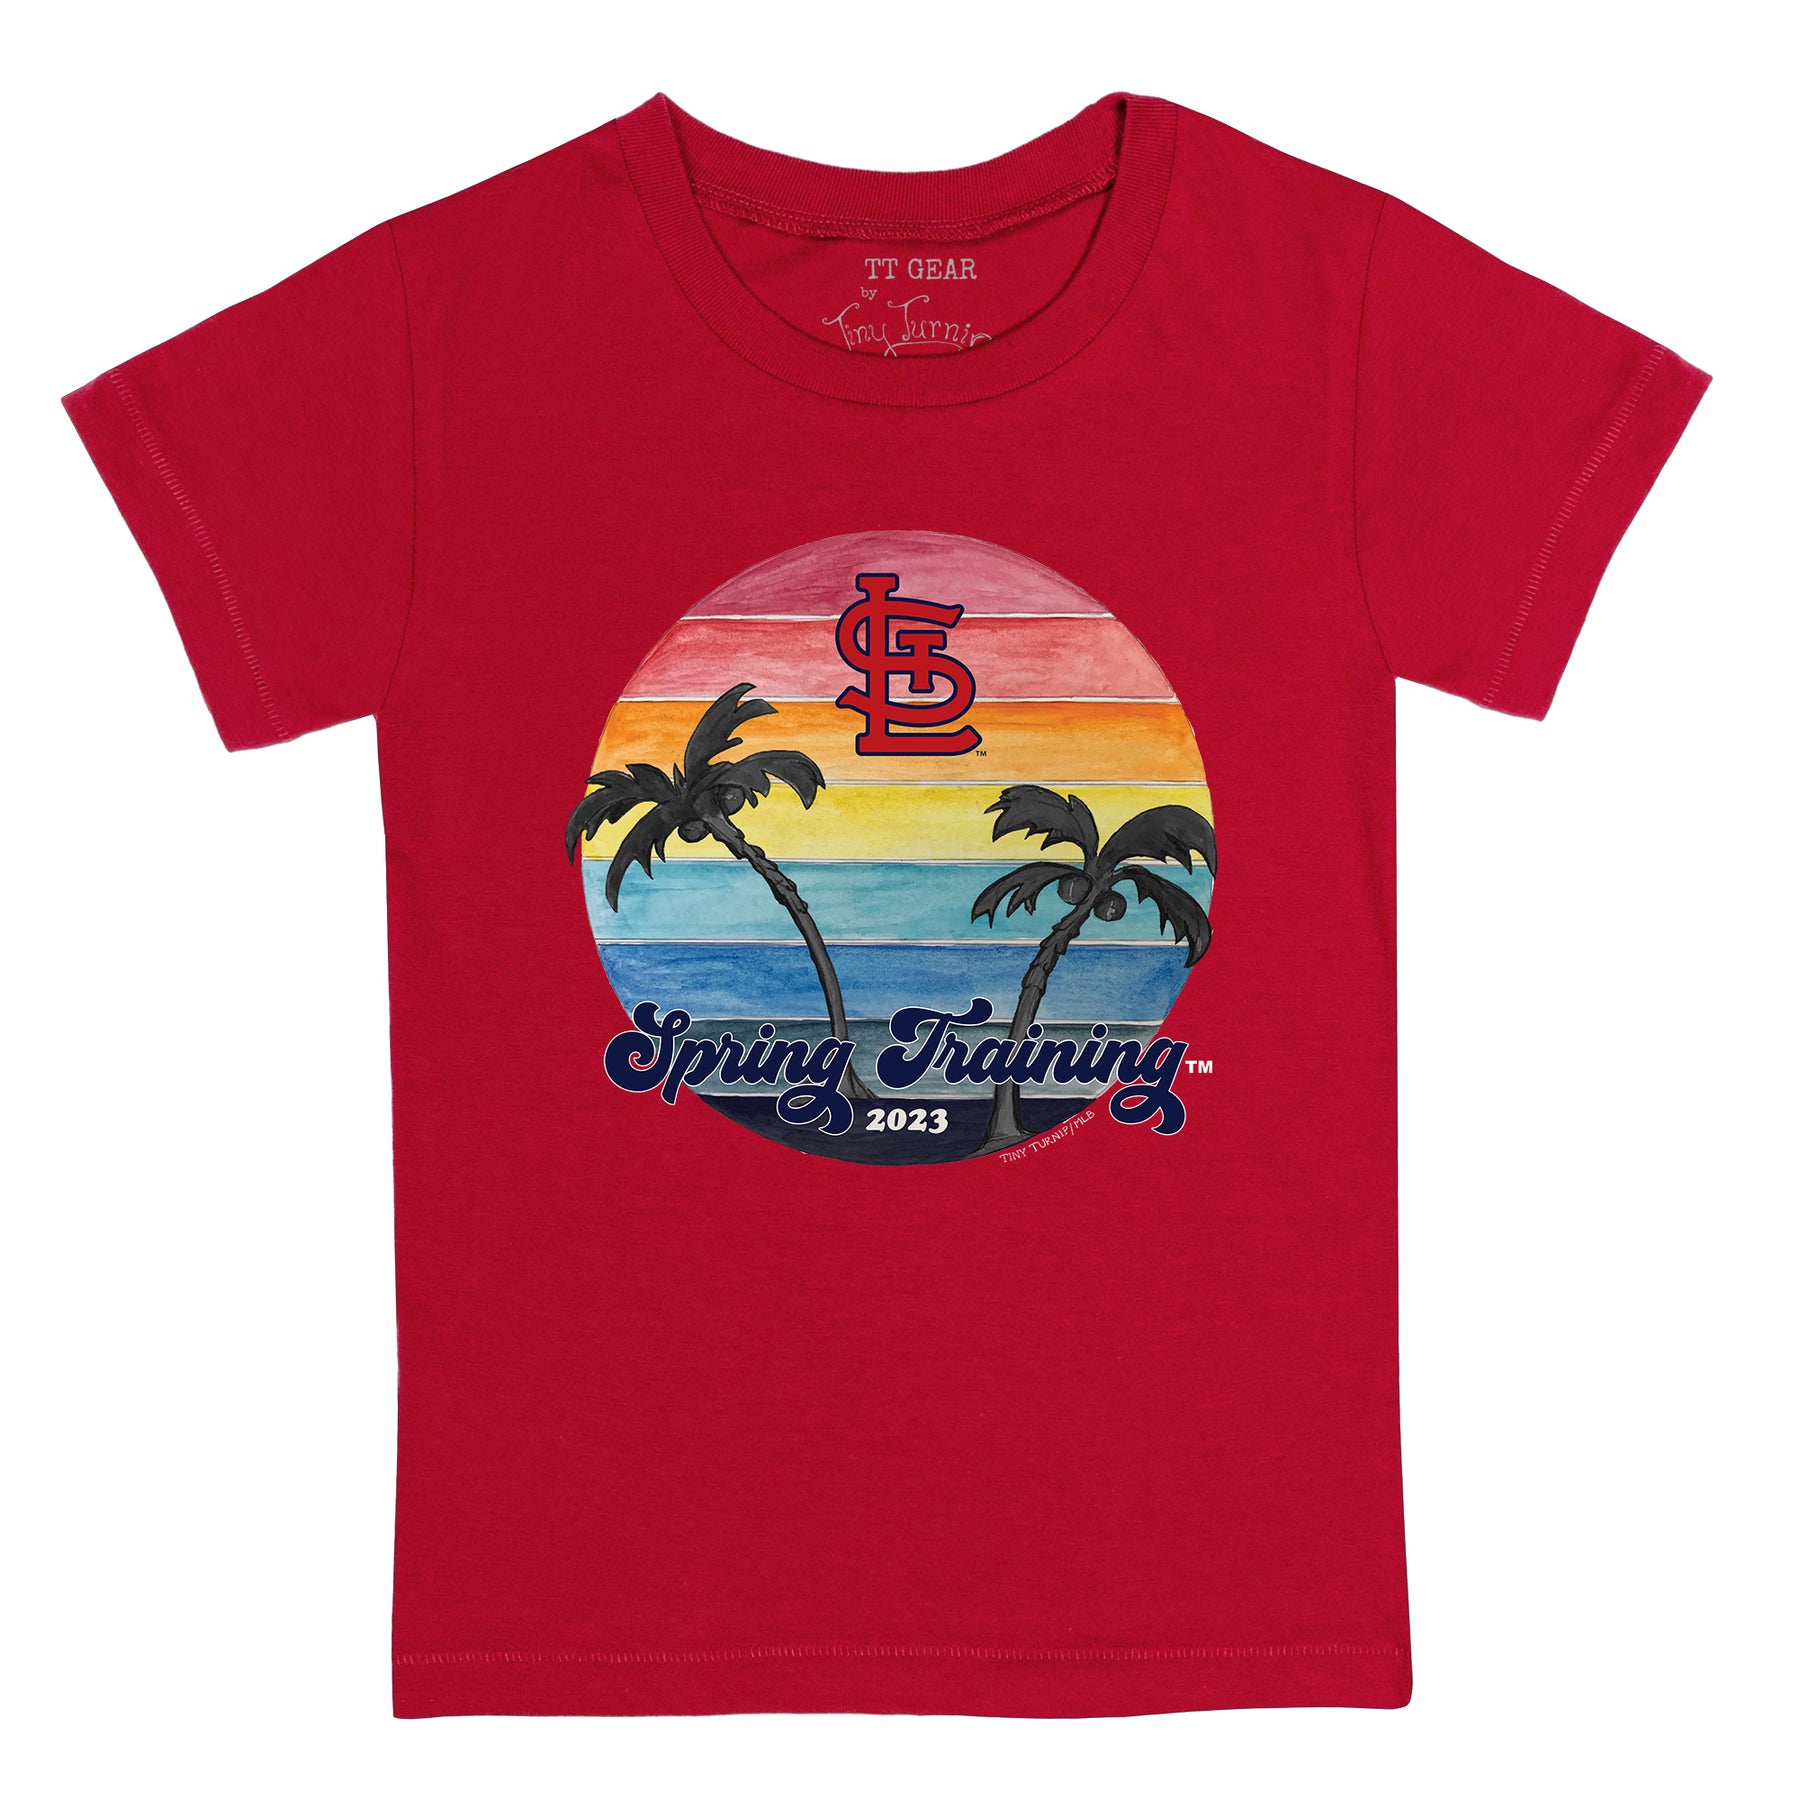 st louis cardinals youth apparel